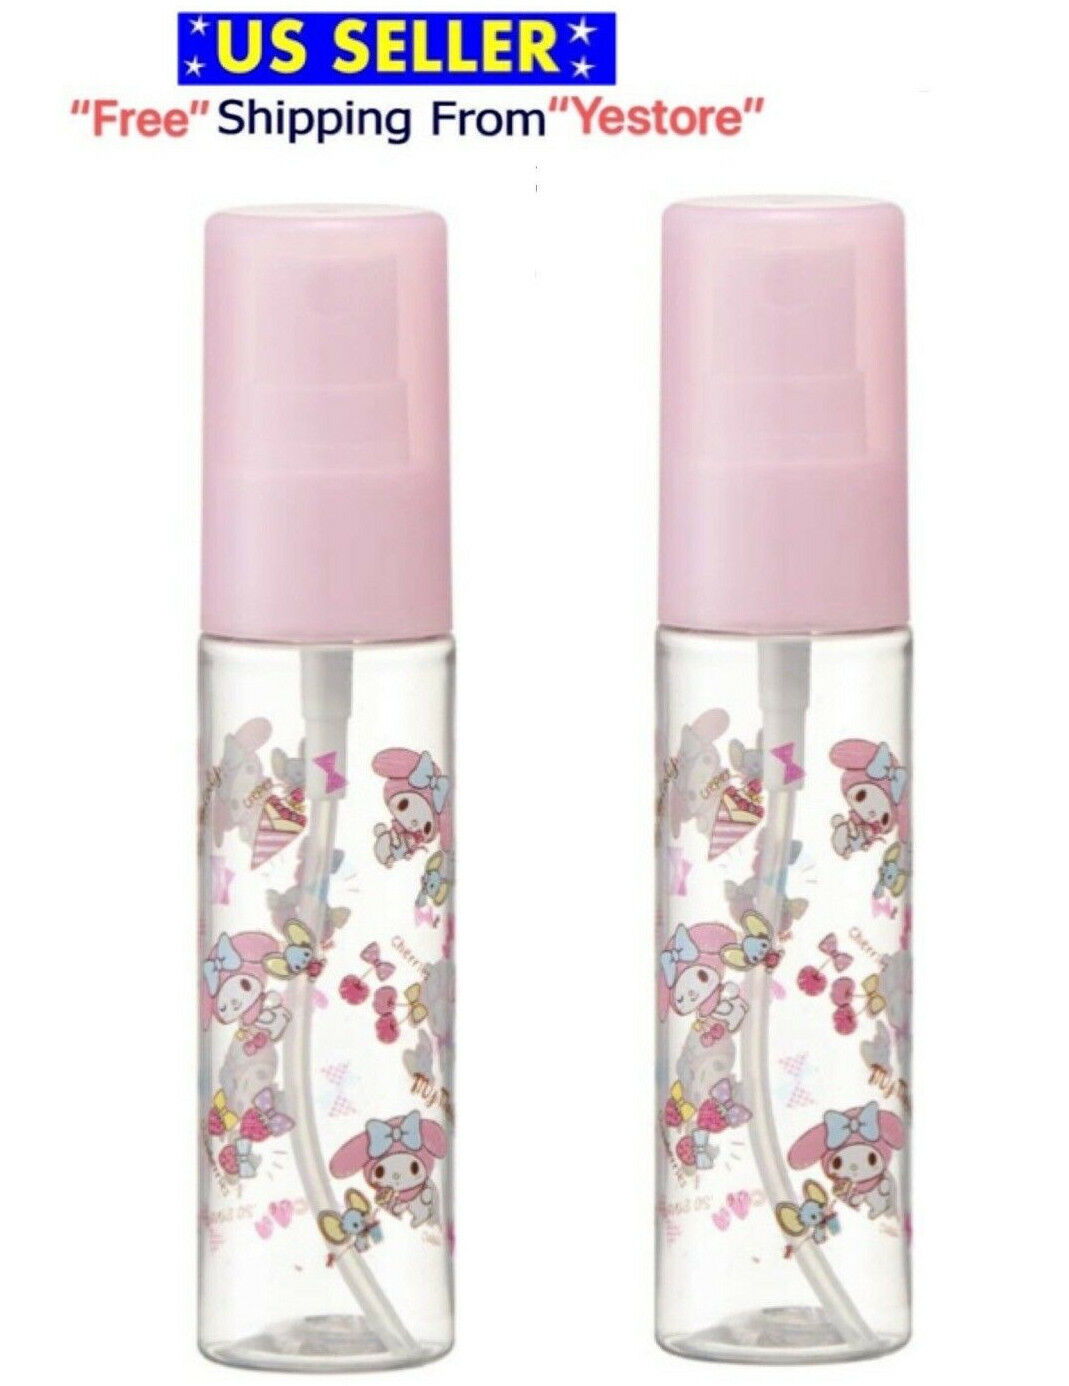 (Set of 2) Sanrio My Melody Pink Heart Lotion Spray Bottle Japan Drink Compact